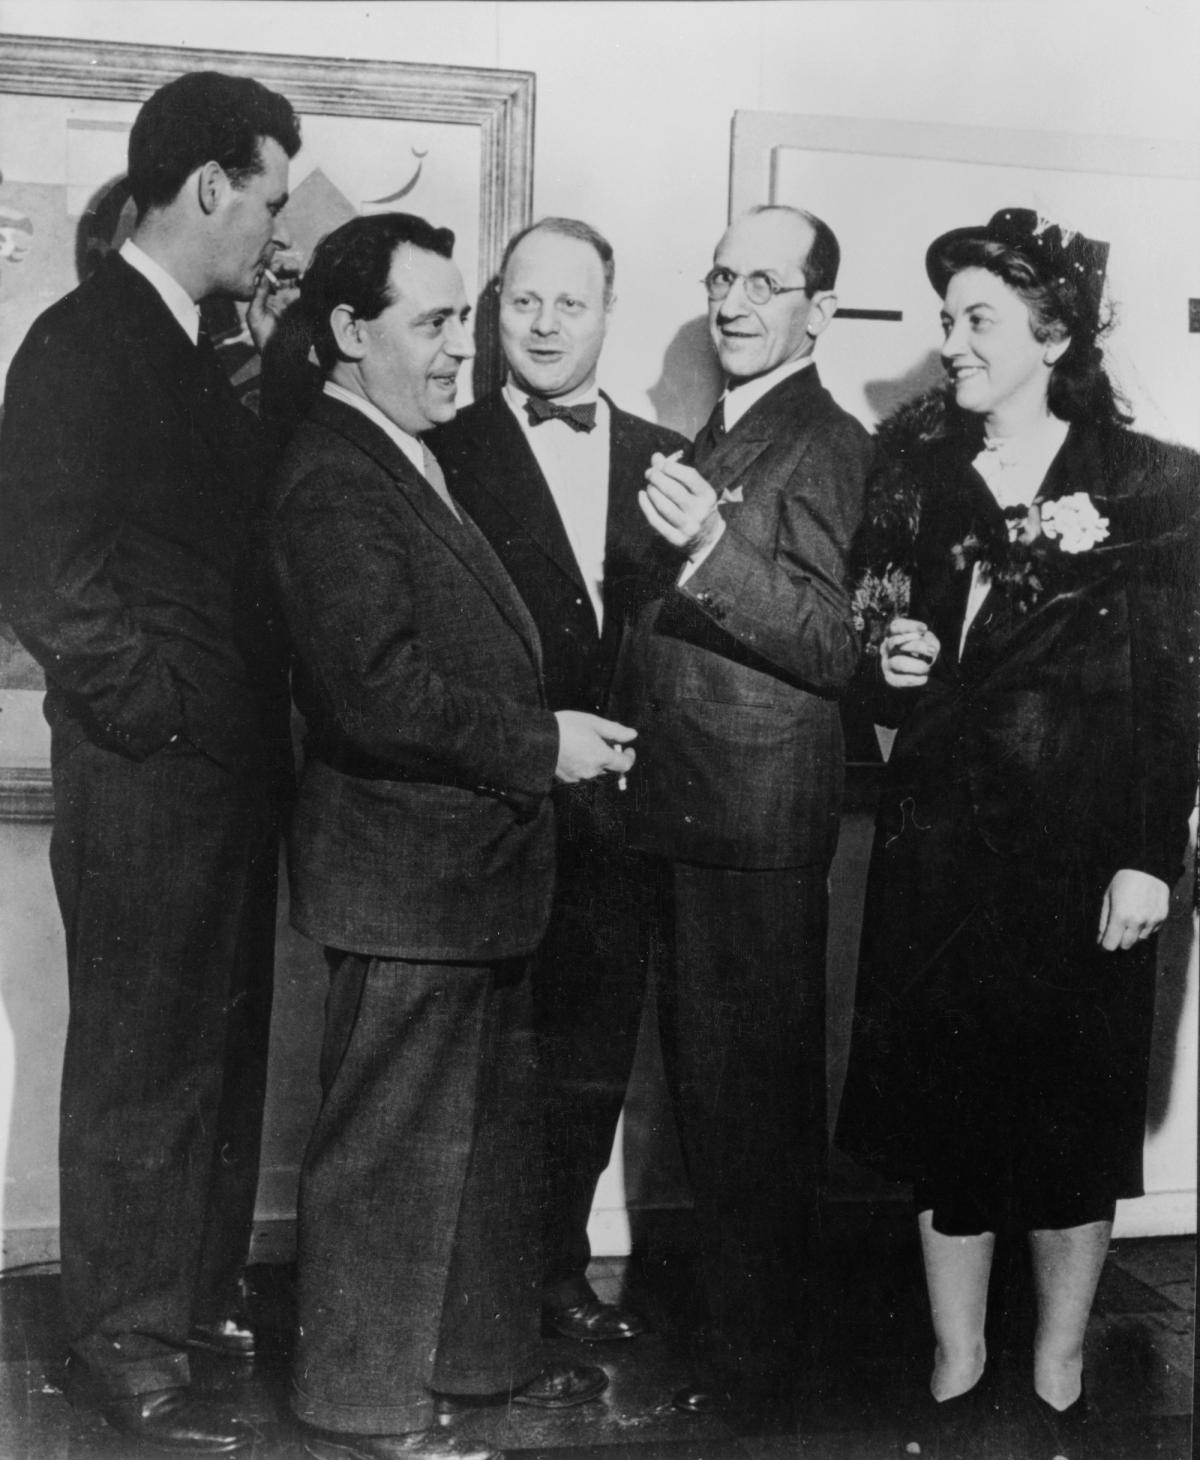 Piet Mondrian (second from right) at an exhibition opening in New York in 1942 